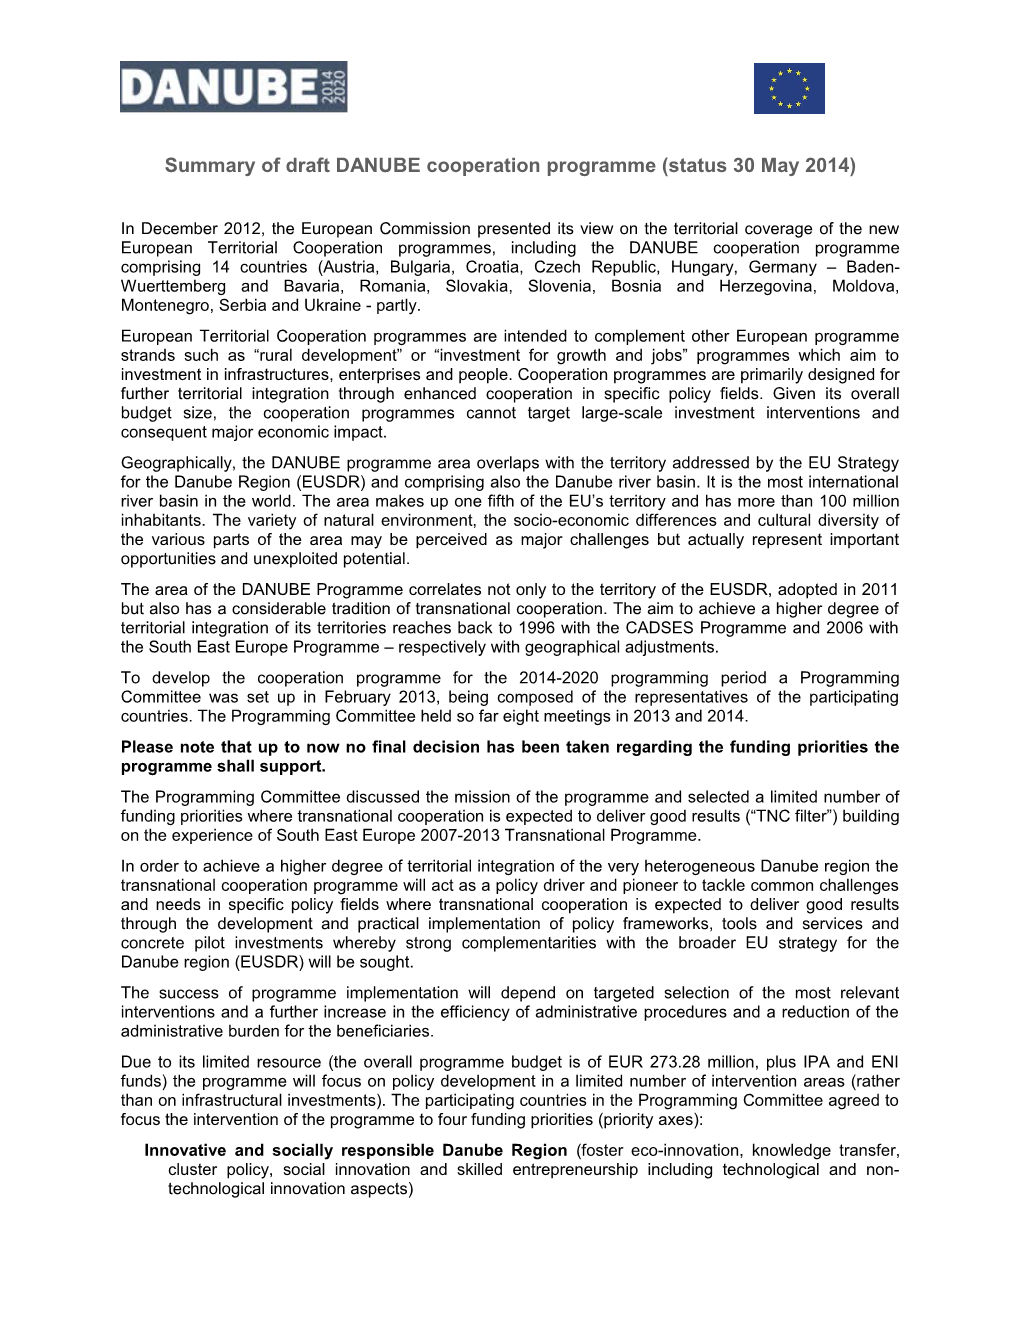 Summary of Draft DANUBE Cooperation Programme (Status 30 May 2014)